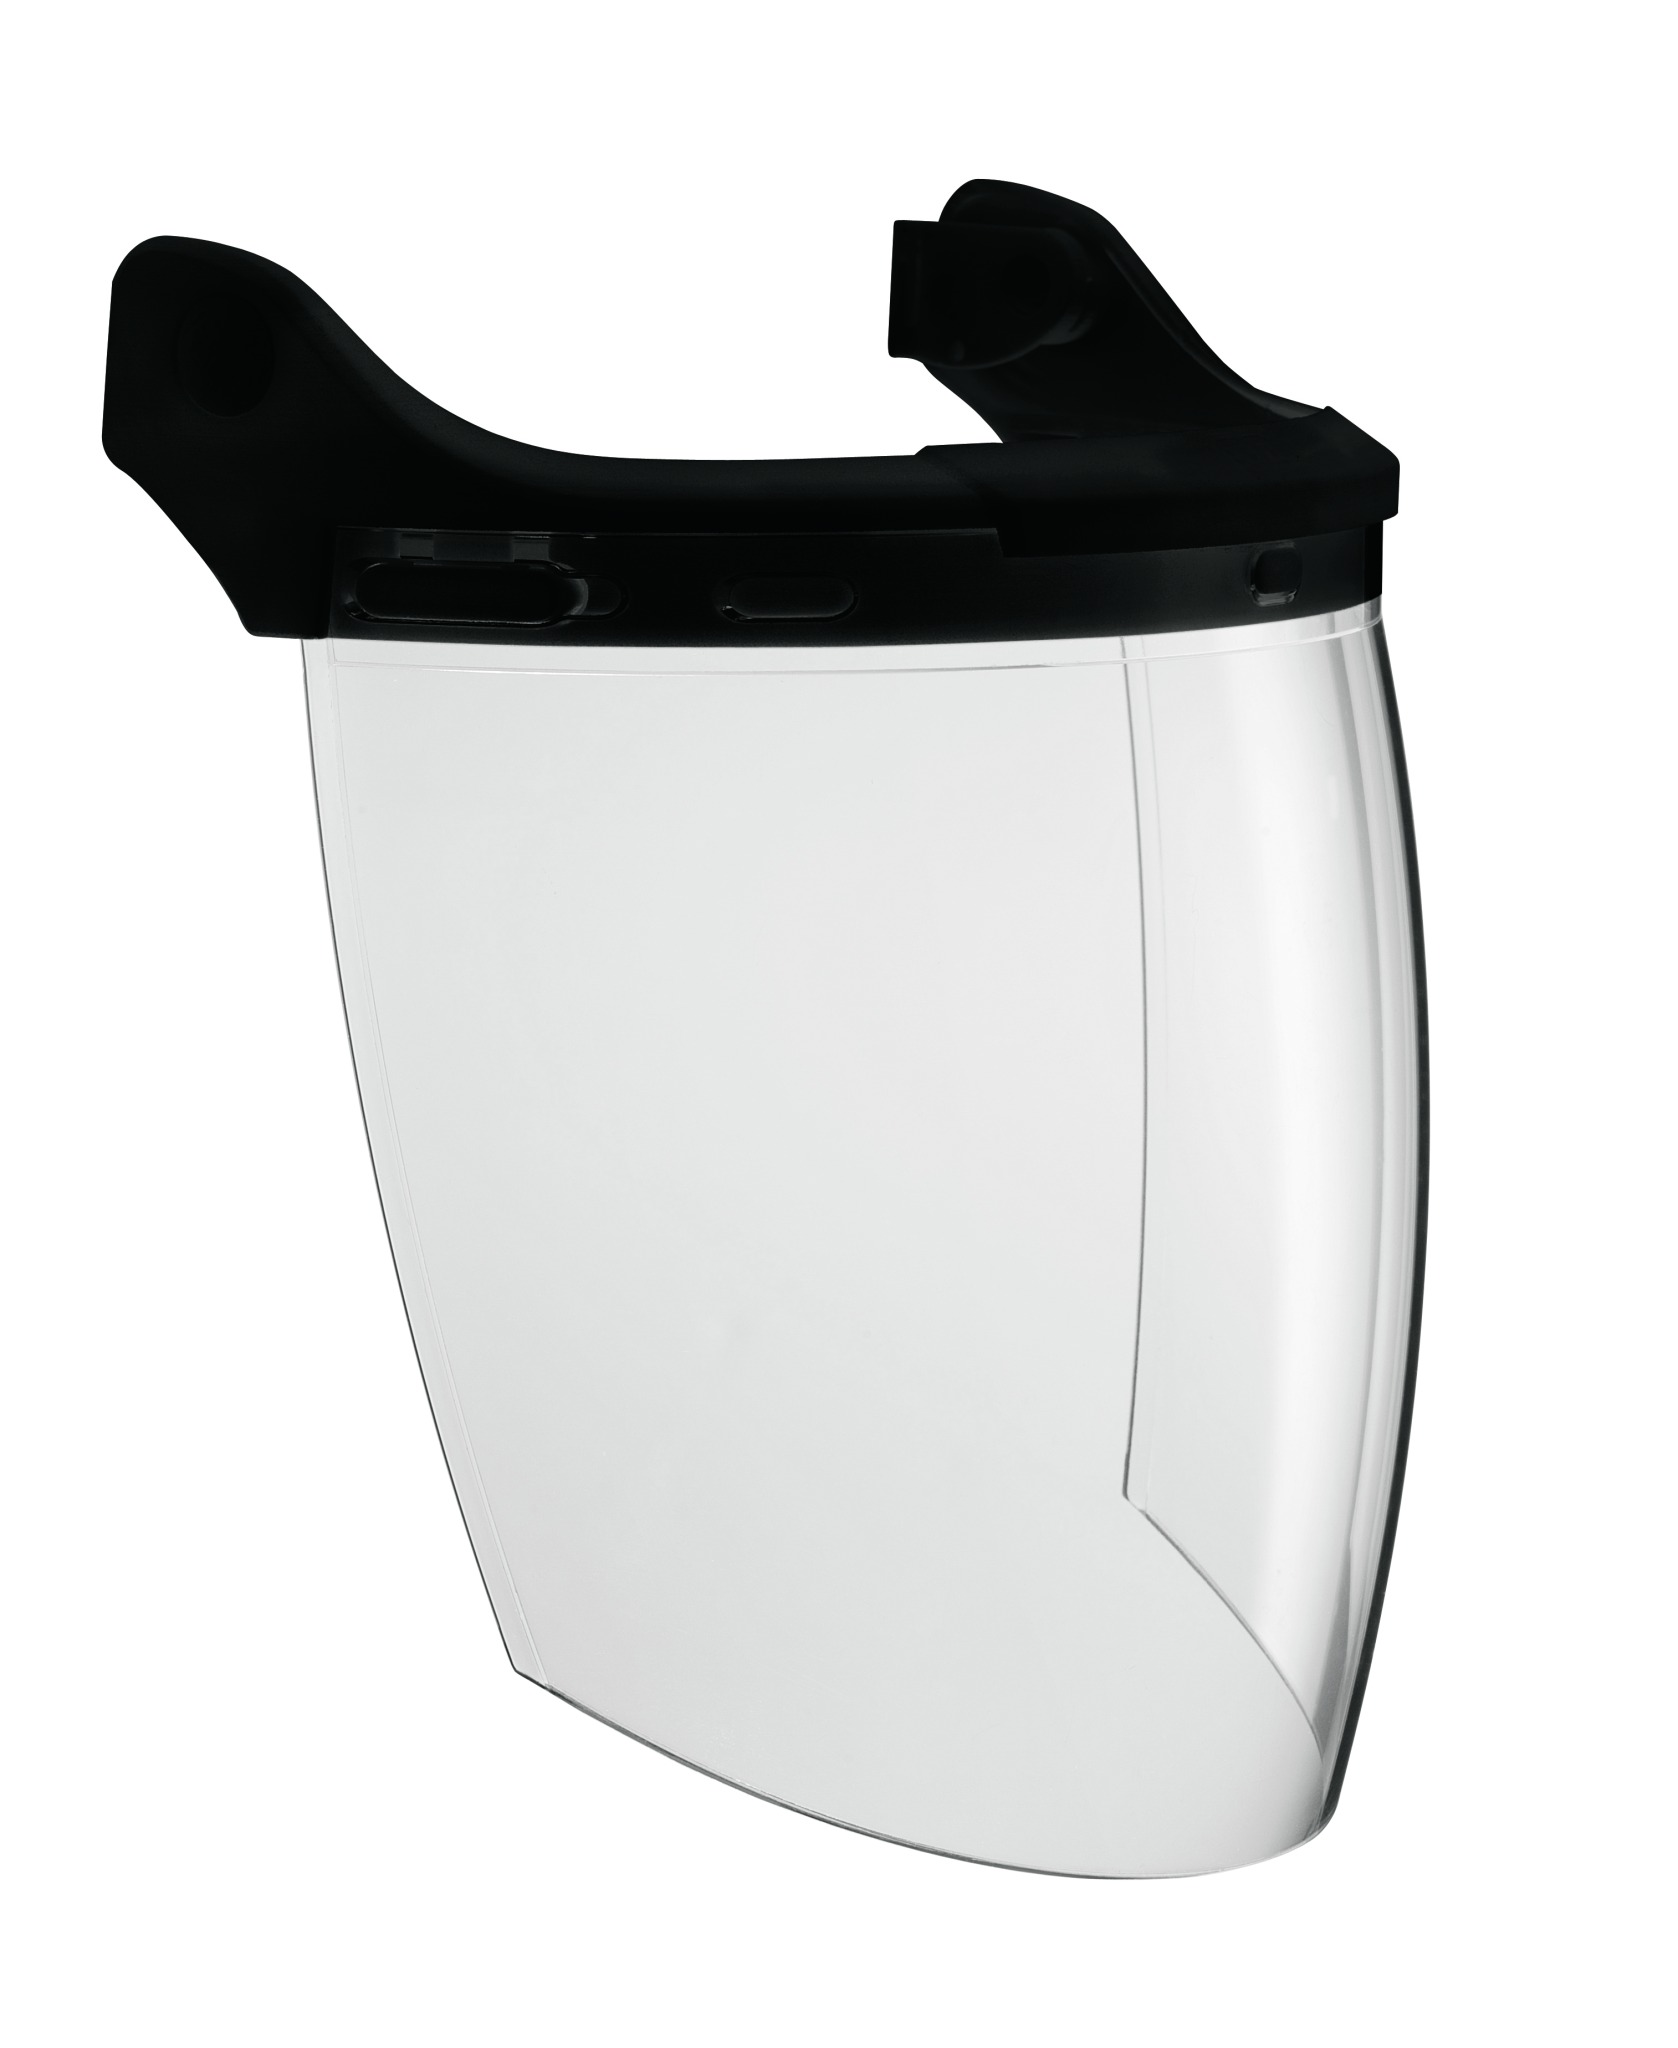 Petzl Vizen Face Shield from Columbia Safety